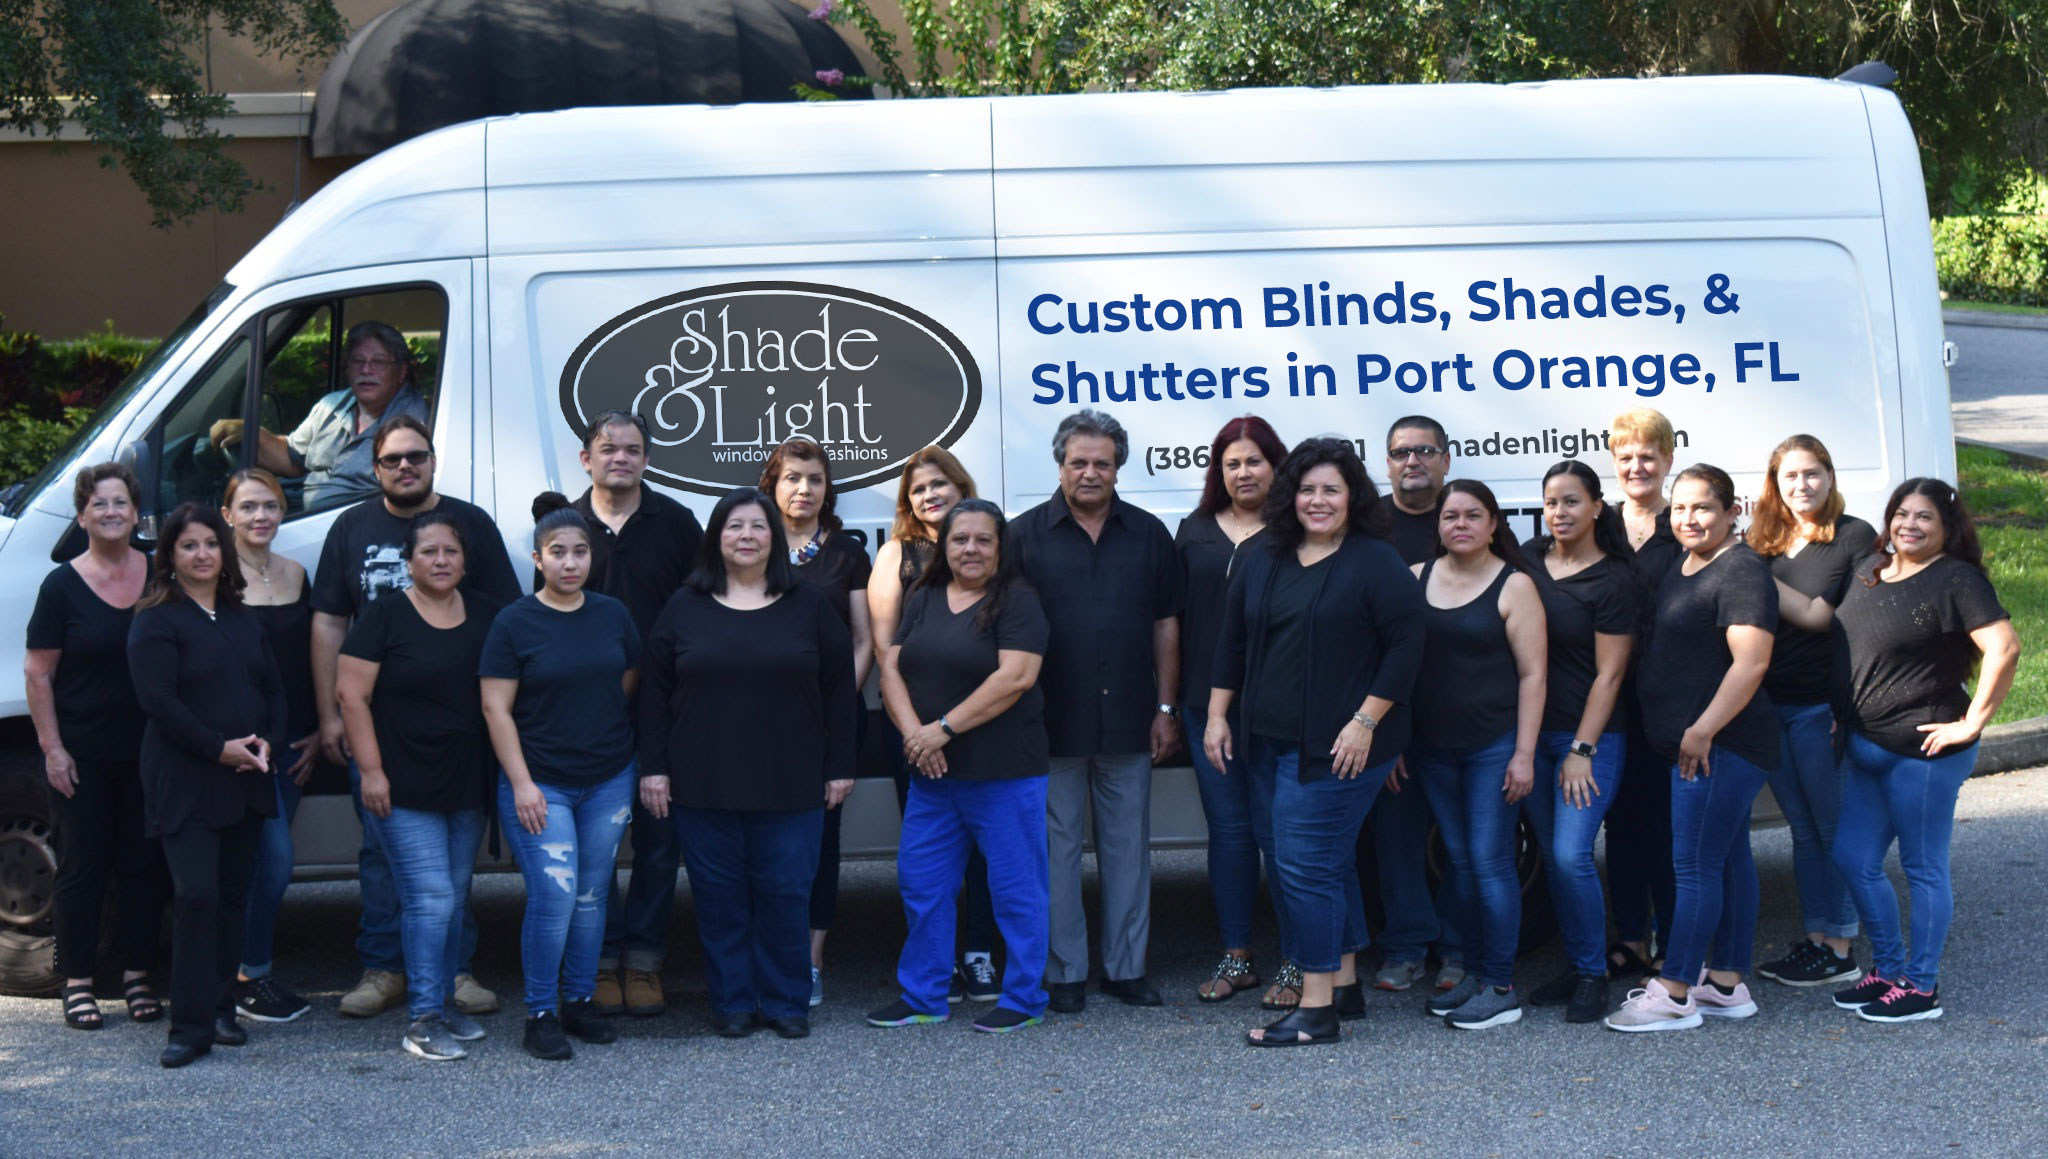 Our proud Shade & Light team unified together in front of work van